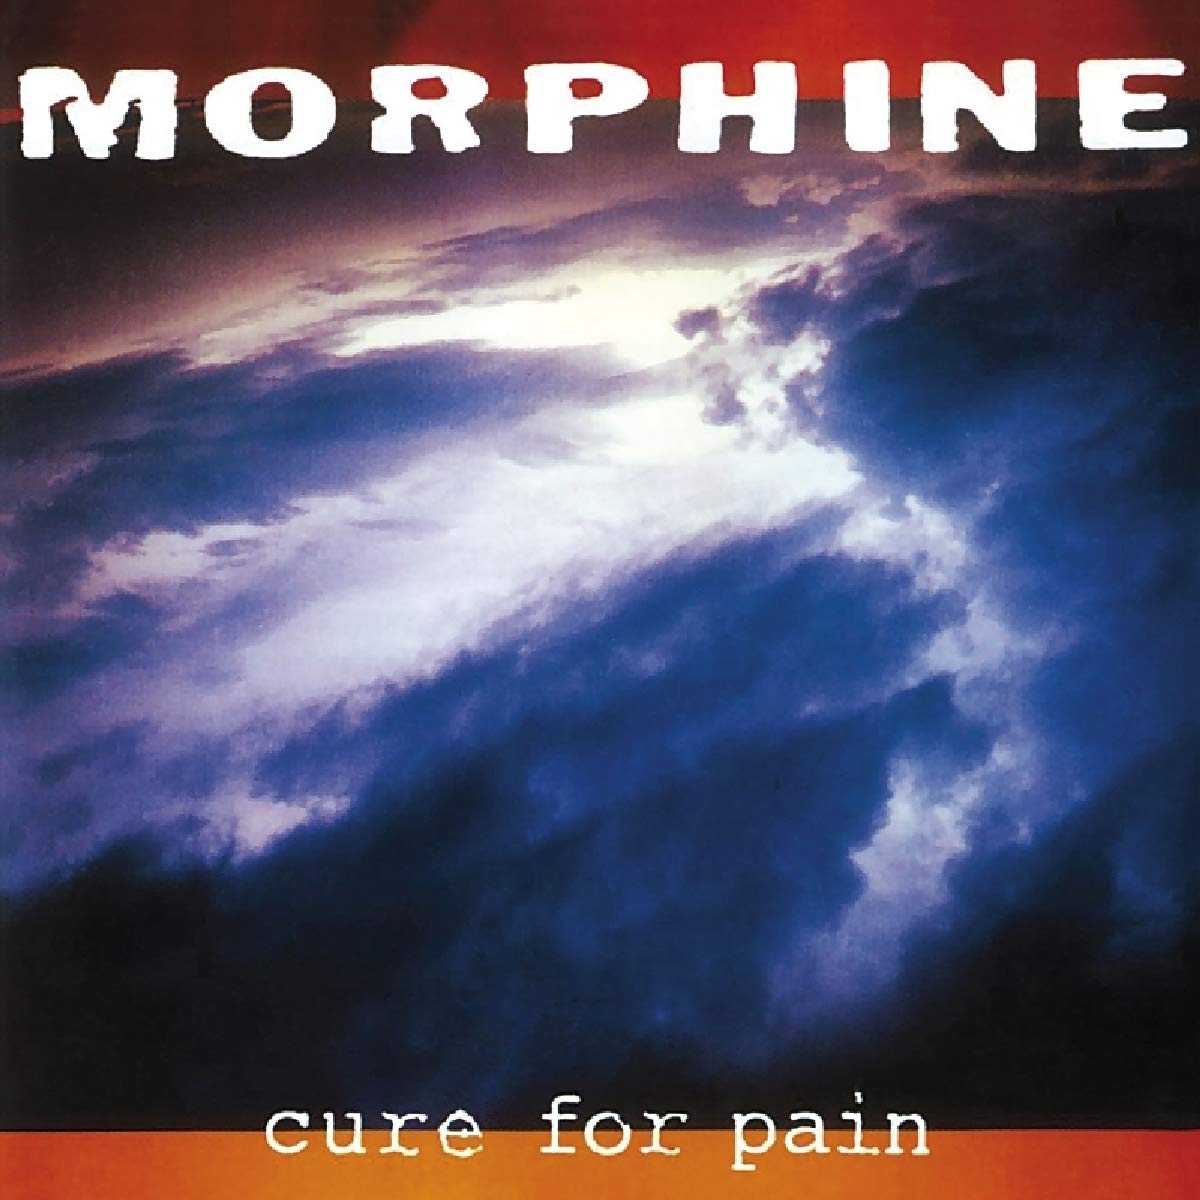 Morphine "Cure For Pain" LP